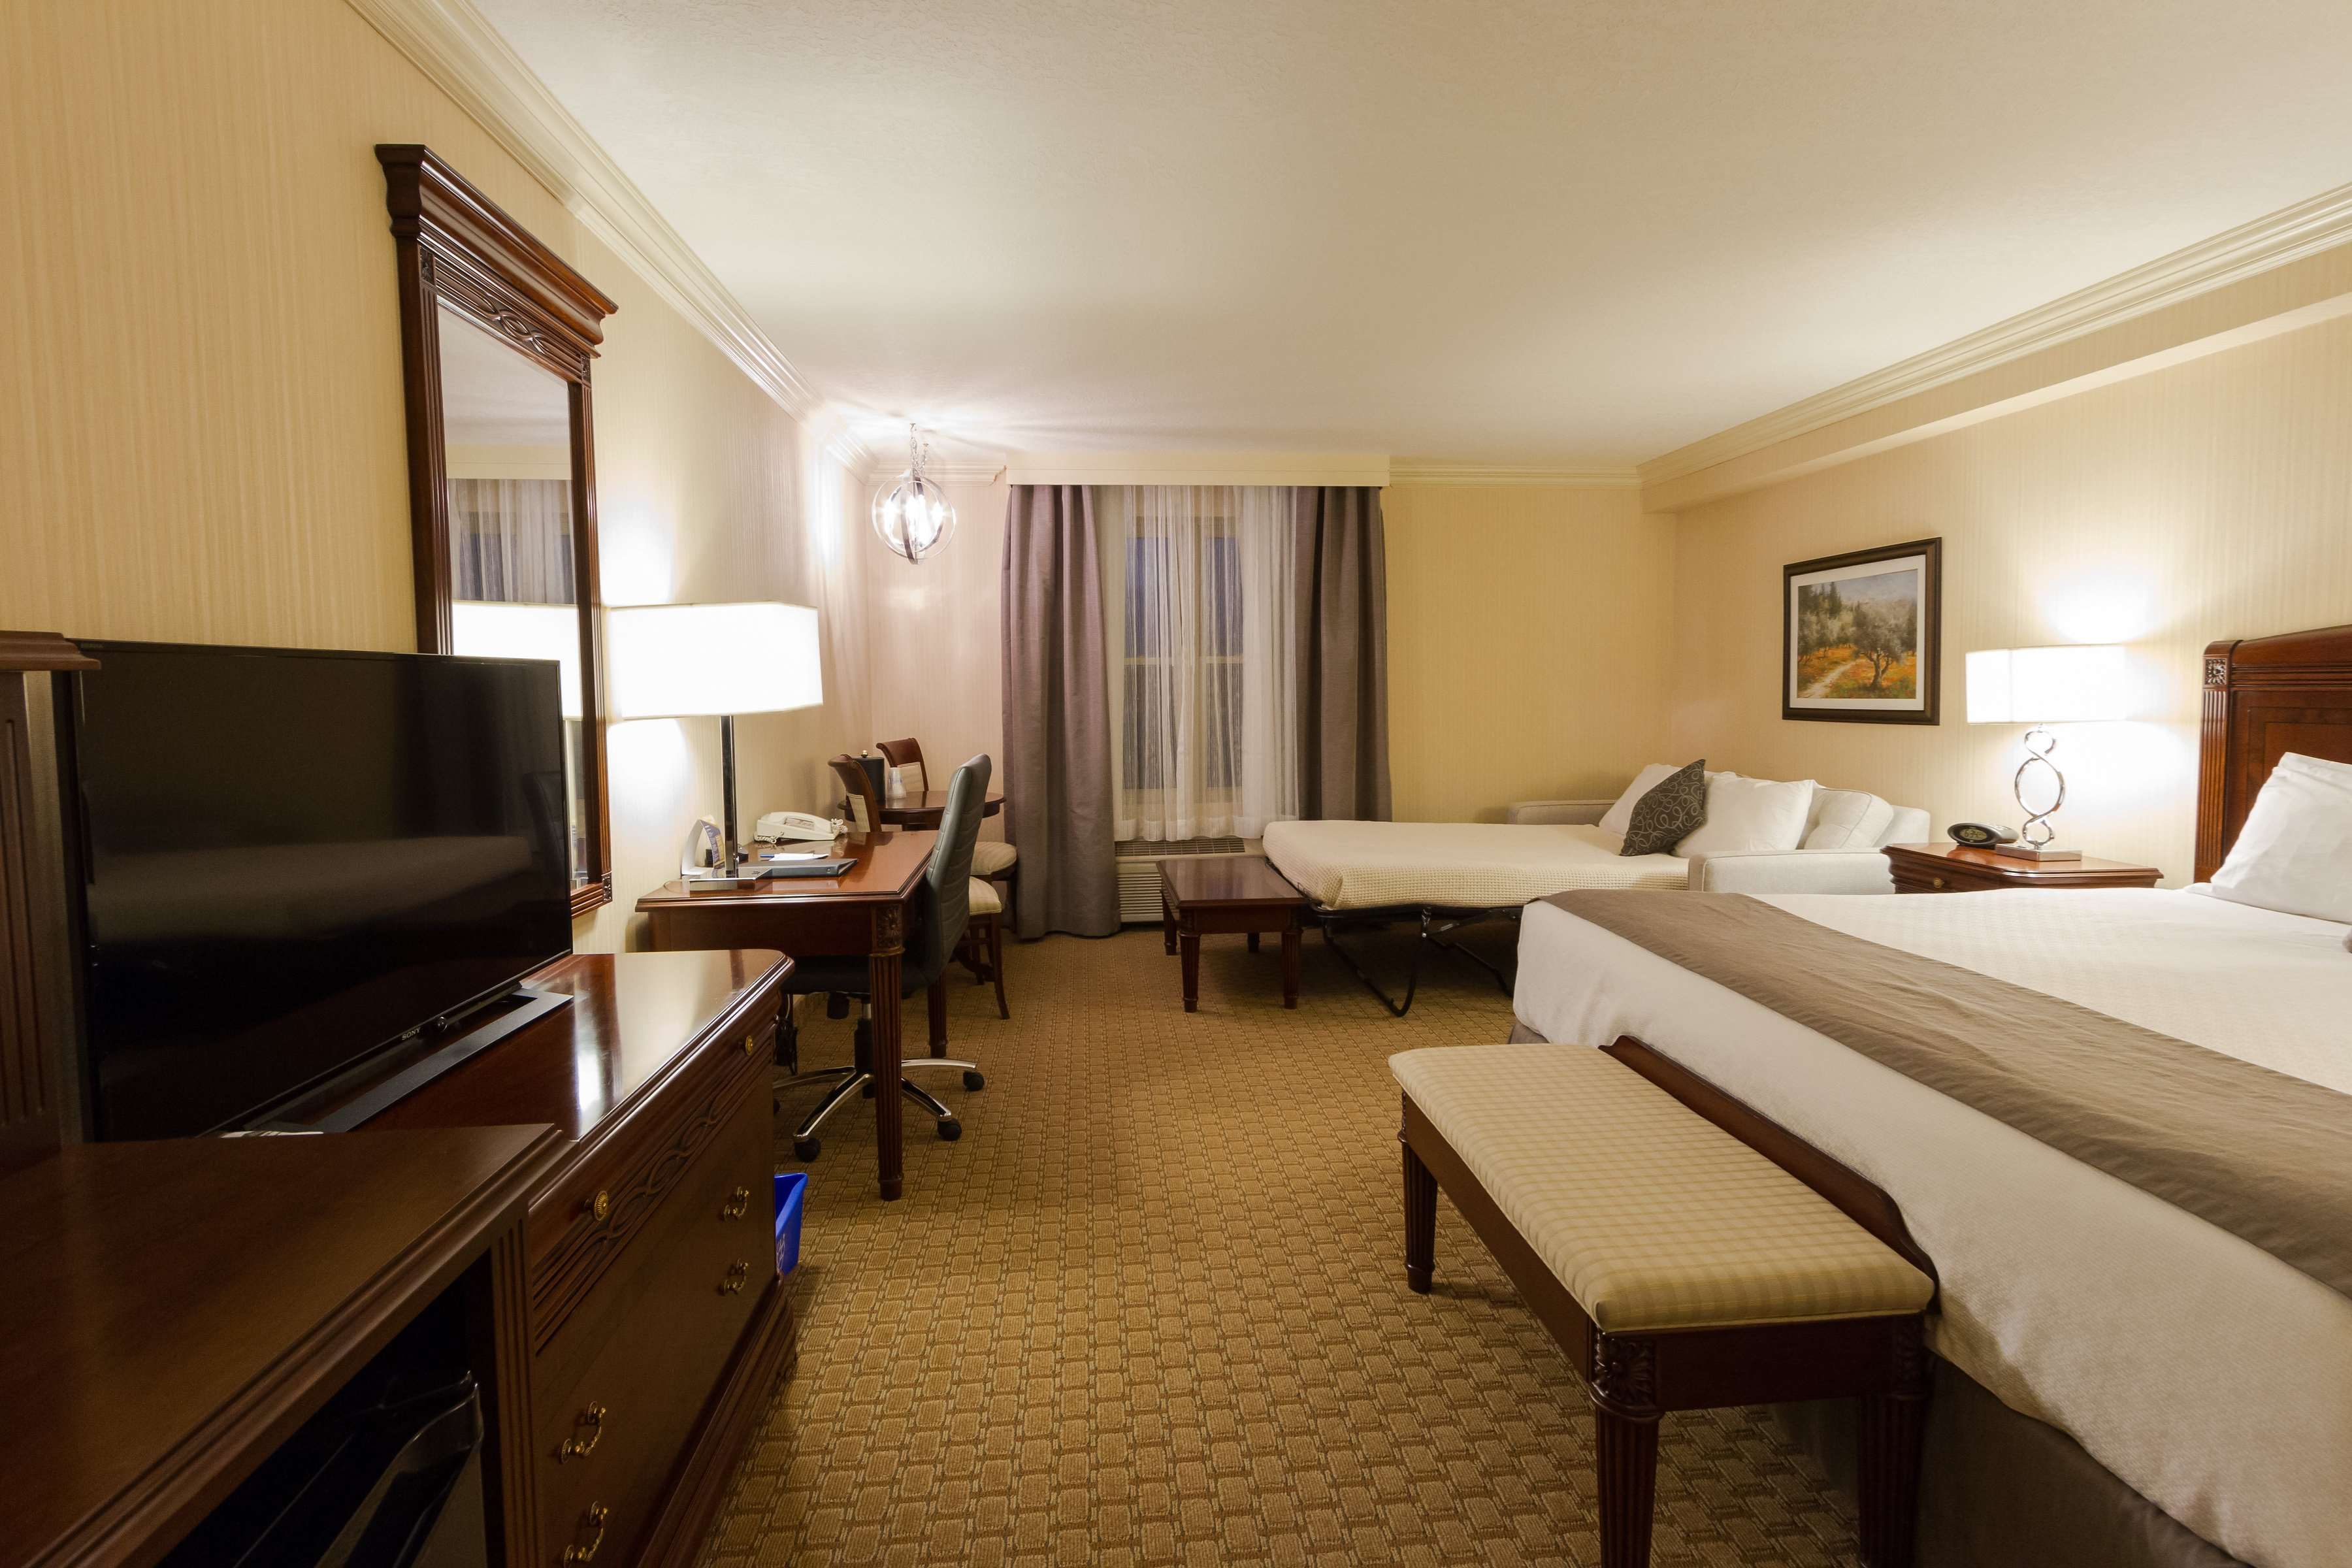 King Bed Guest Room Best Western Plus The Arden Park Hotel Stratford (519)275-2936